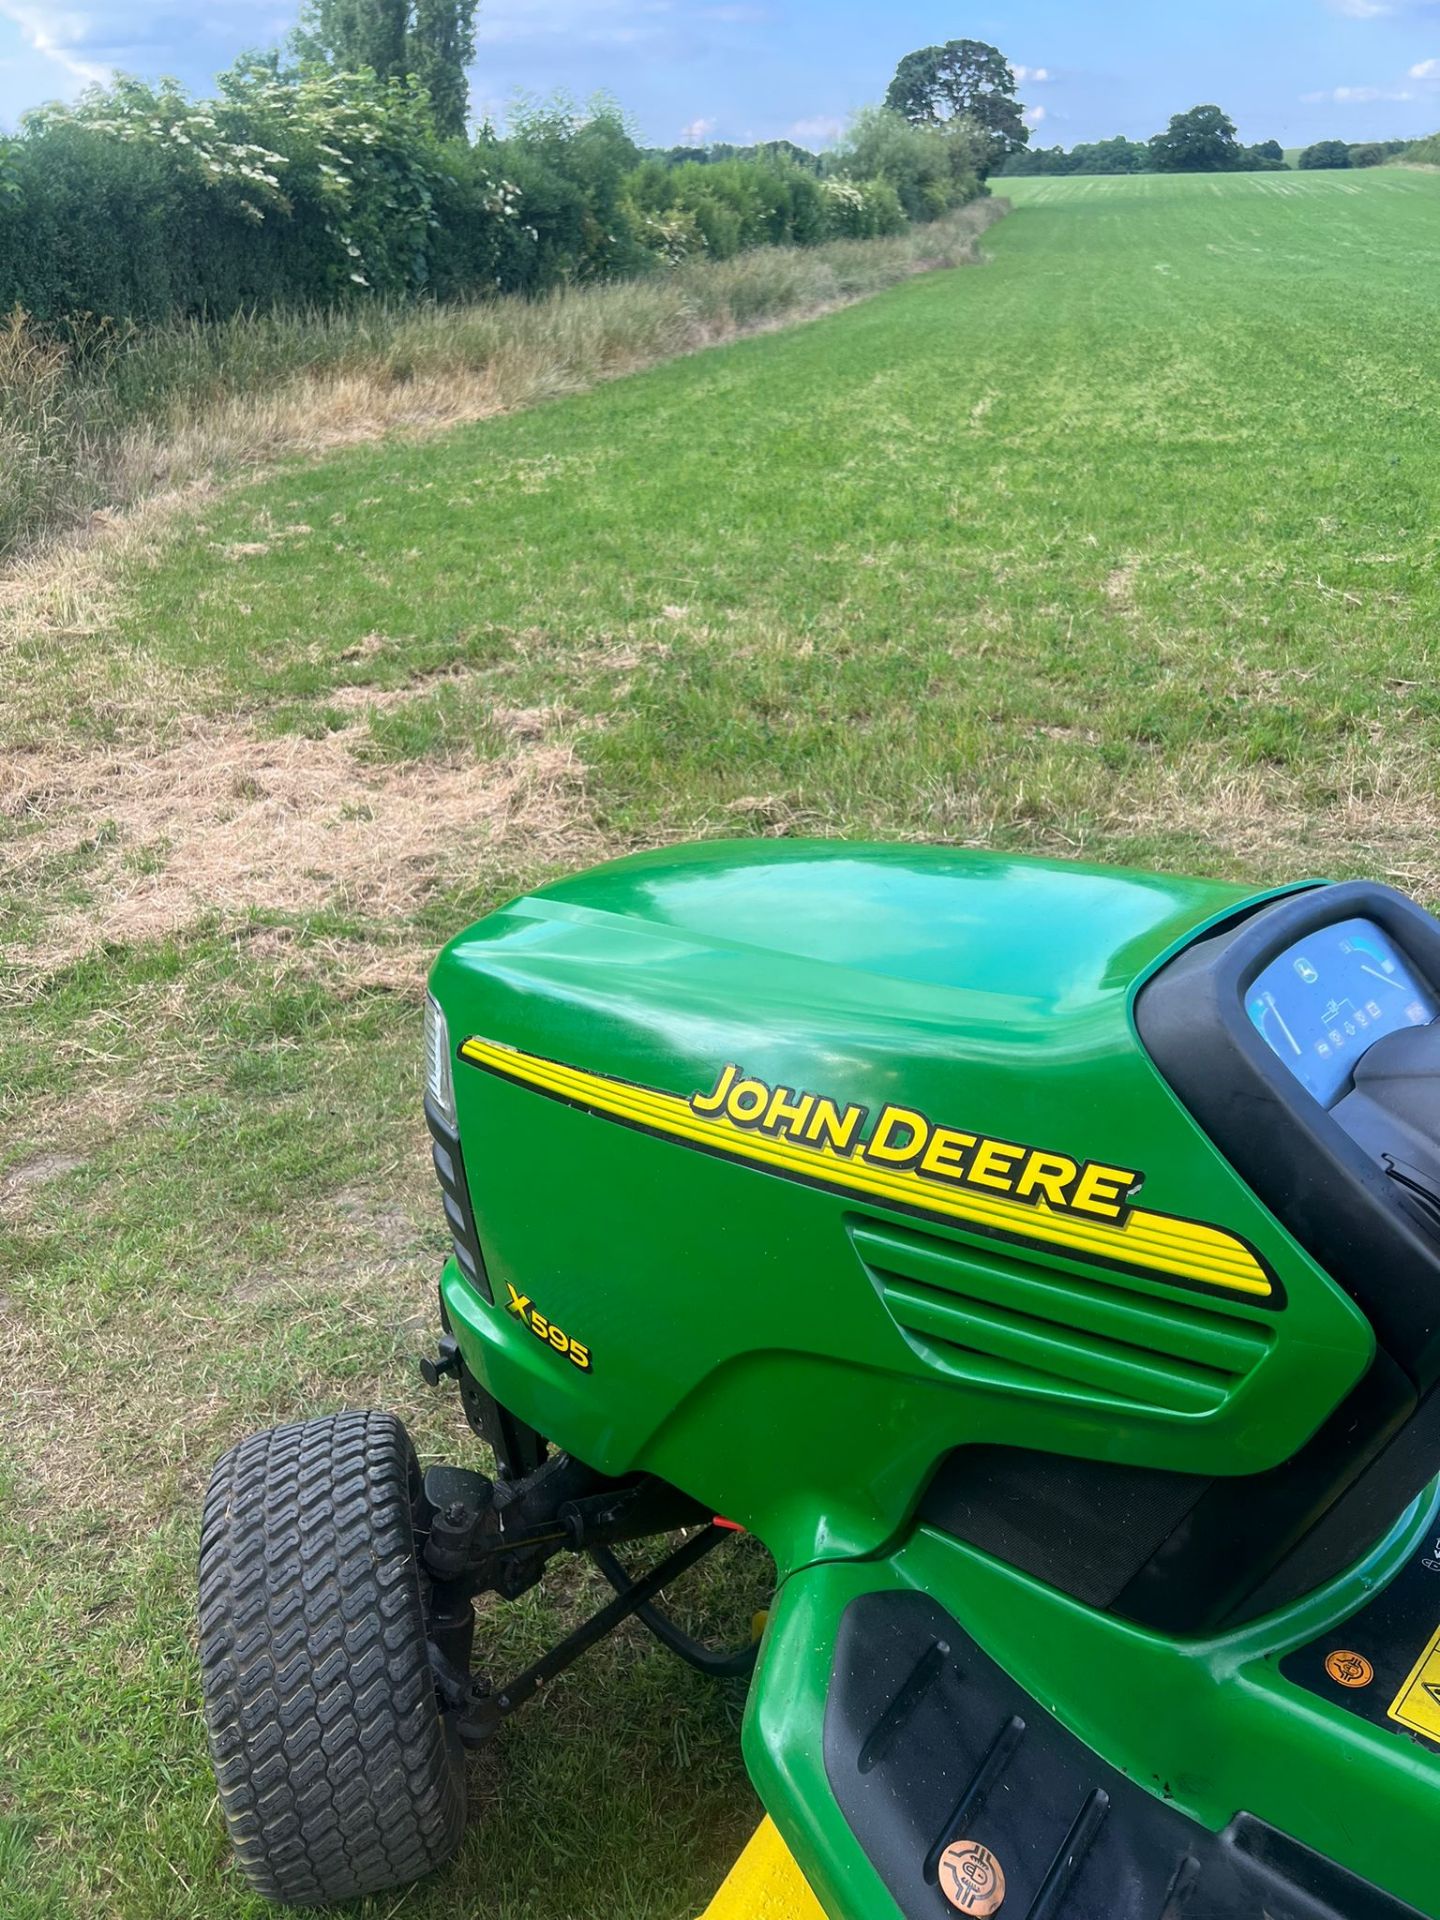 JOHN DEERE X595 4x4 RIDE ON LAWN MOWER WITH COLLECTOR *PLUS VAT* - Image 5 of 6